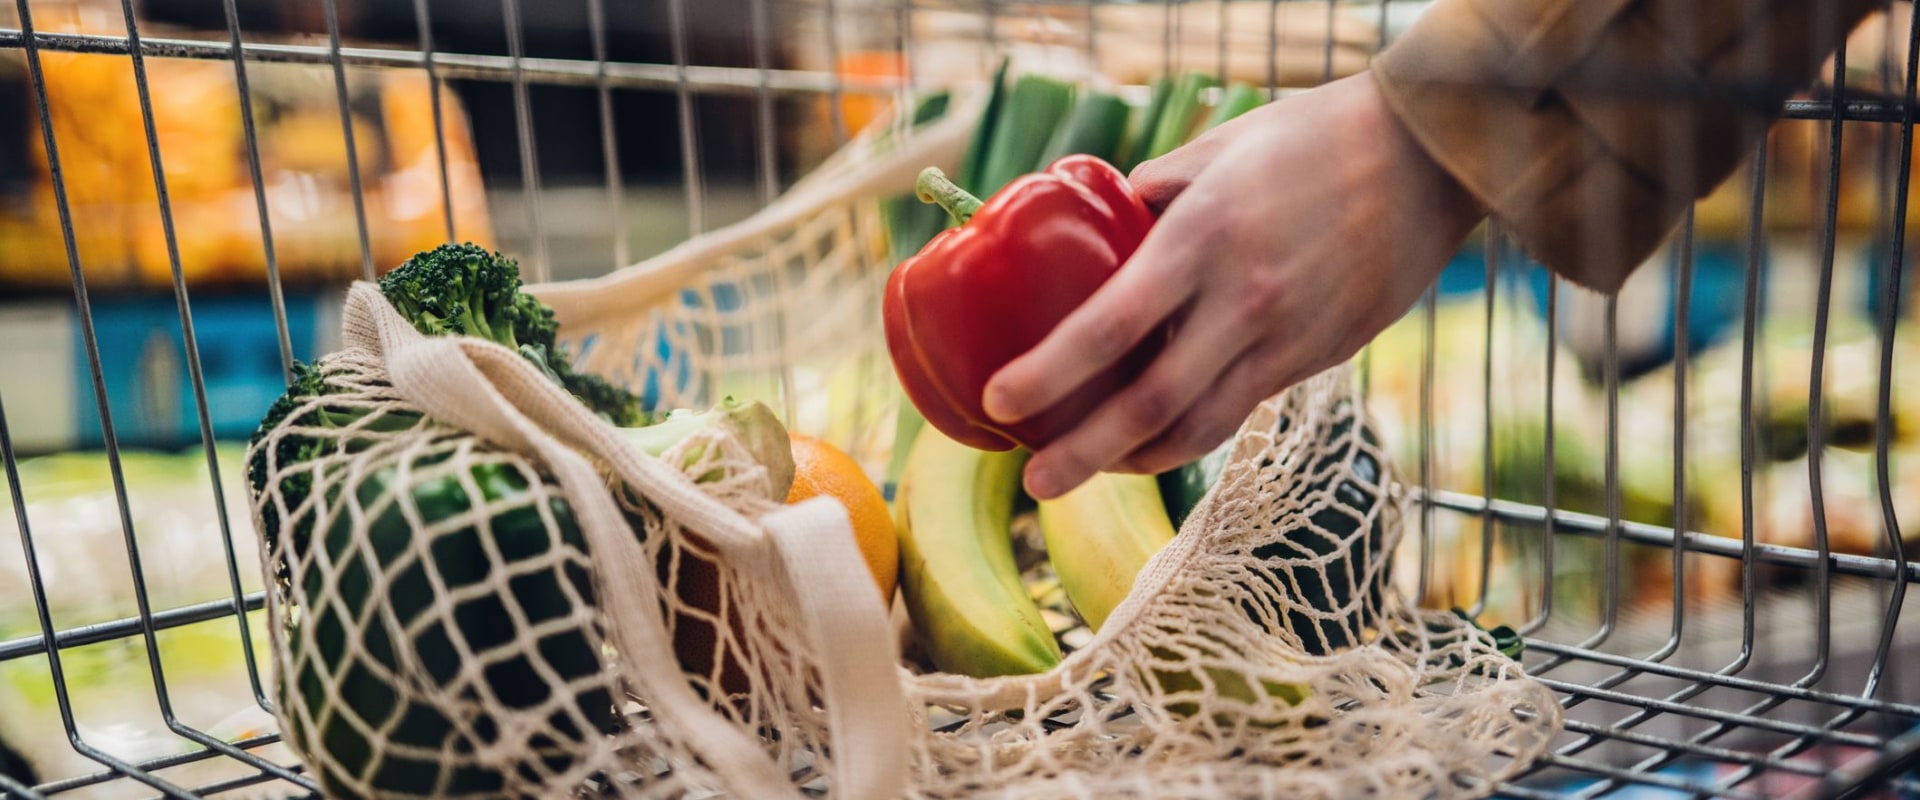 Healthy Grocery Shopping: What to Buy and Why